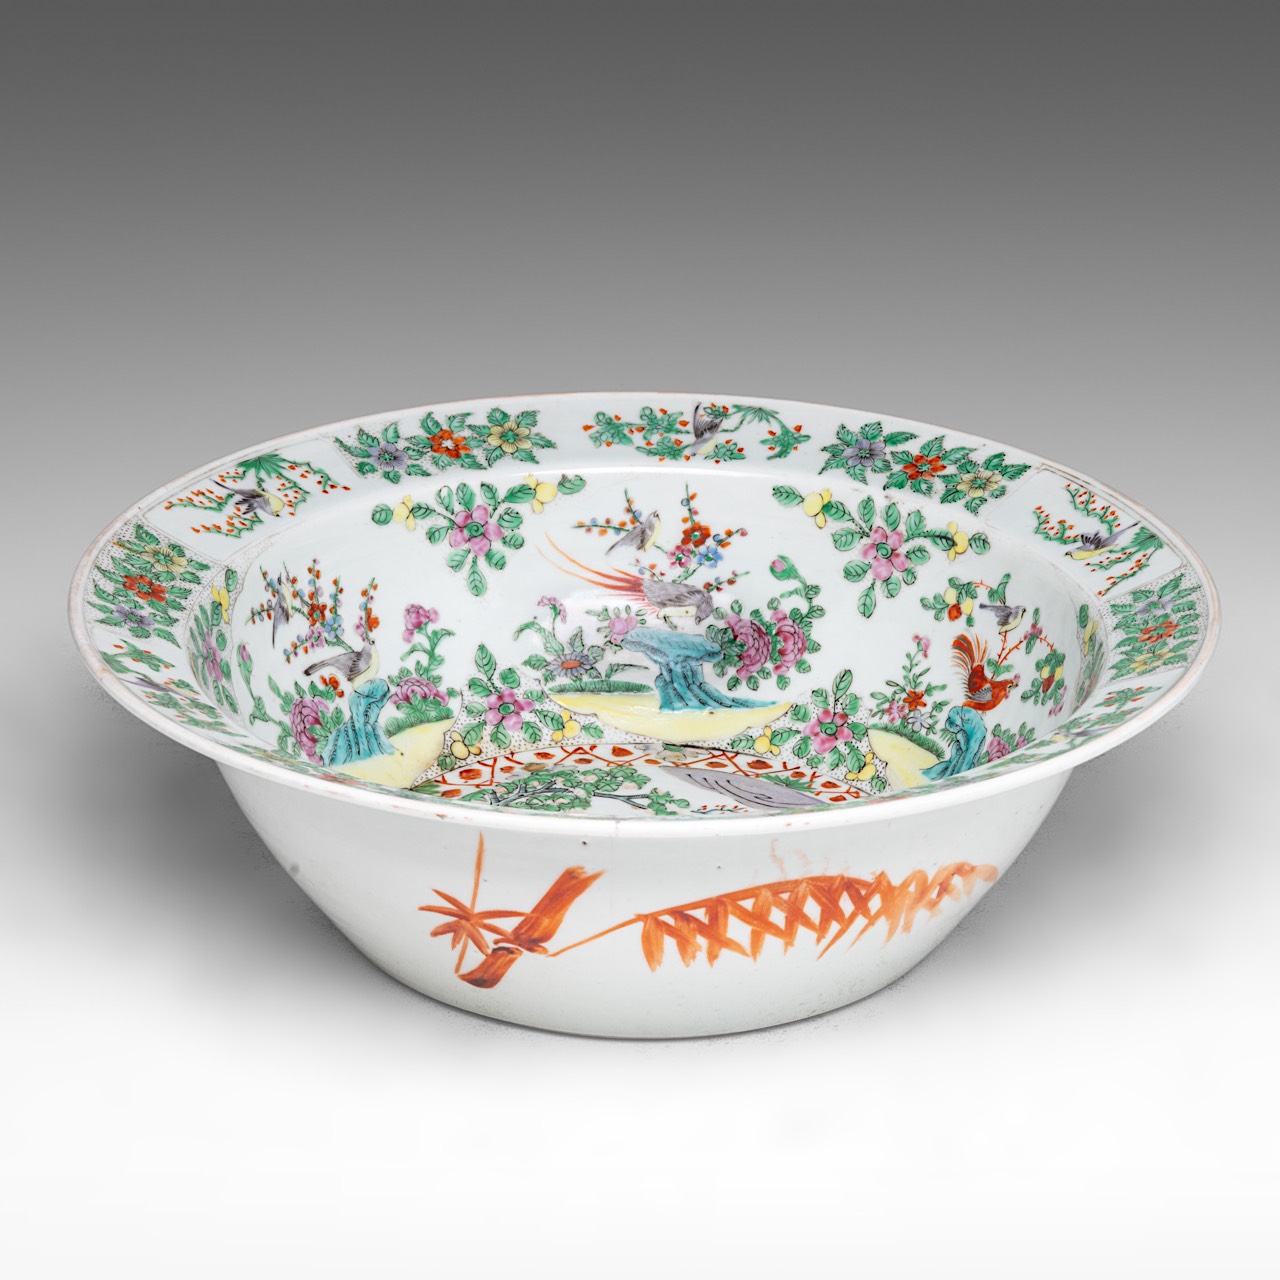 A Chinese Qianjiangcai 'Ladies in a chamber' basin bowl, late 19thC, dia 37,5 - H 11,8 cm - Image 3 of 7